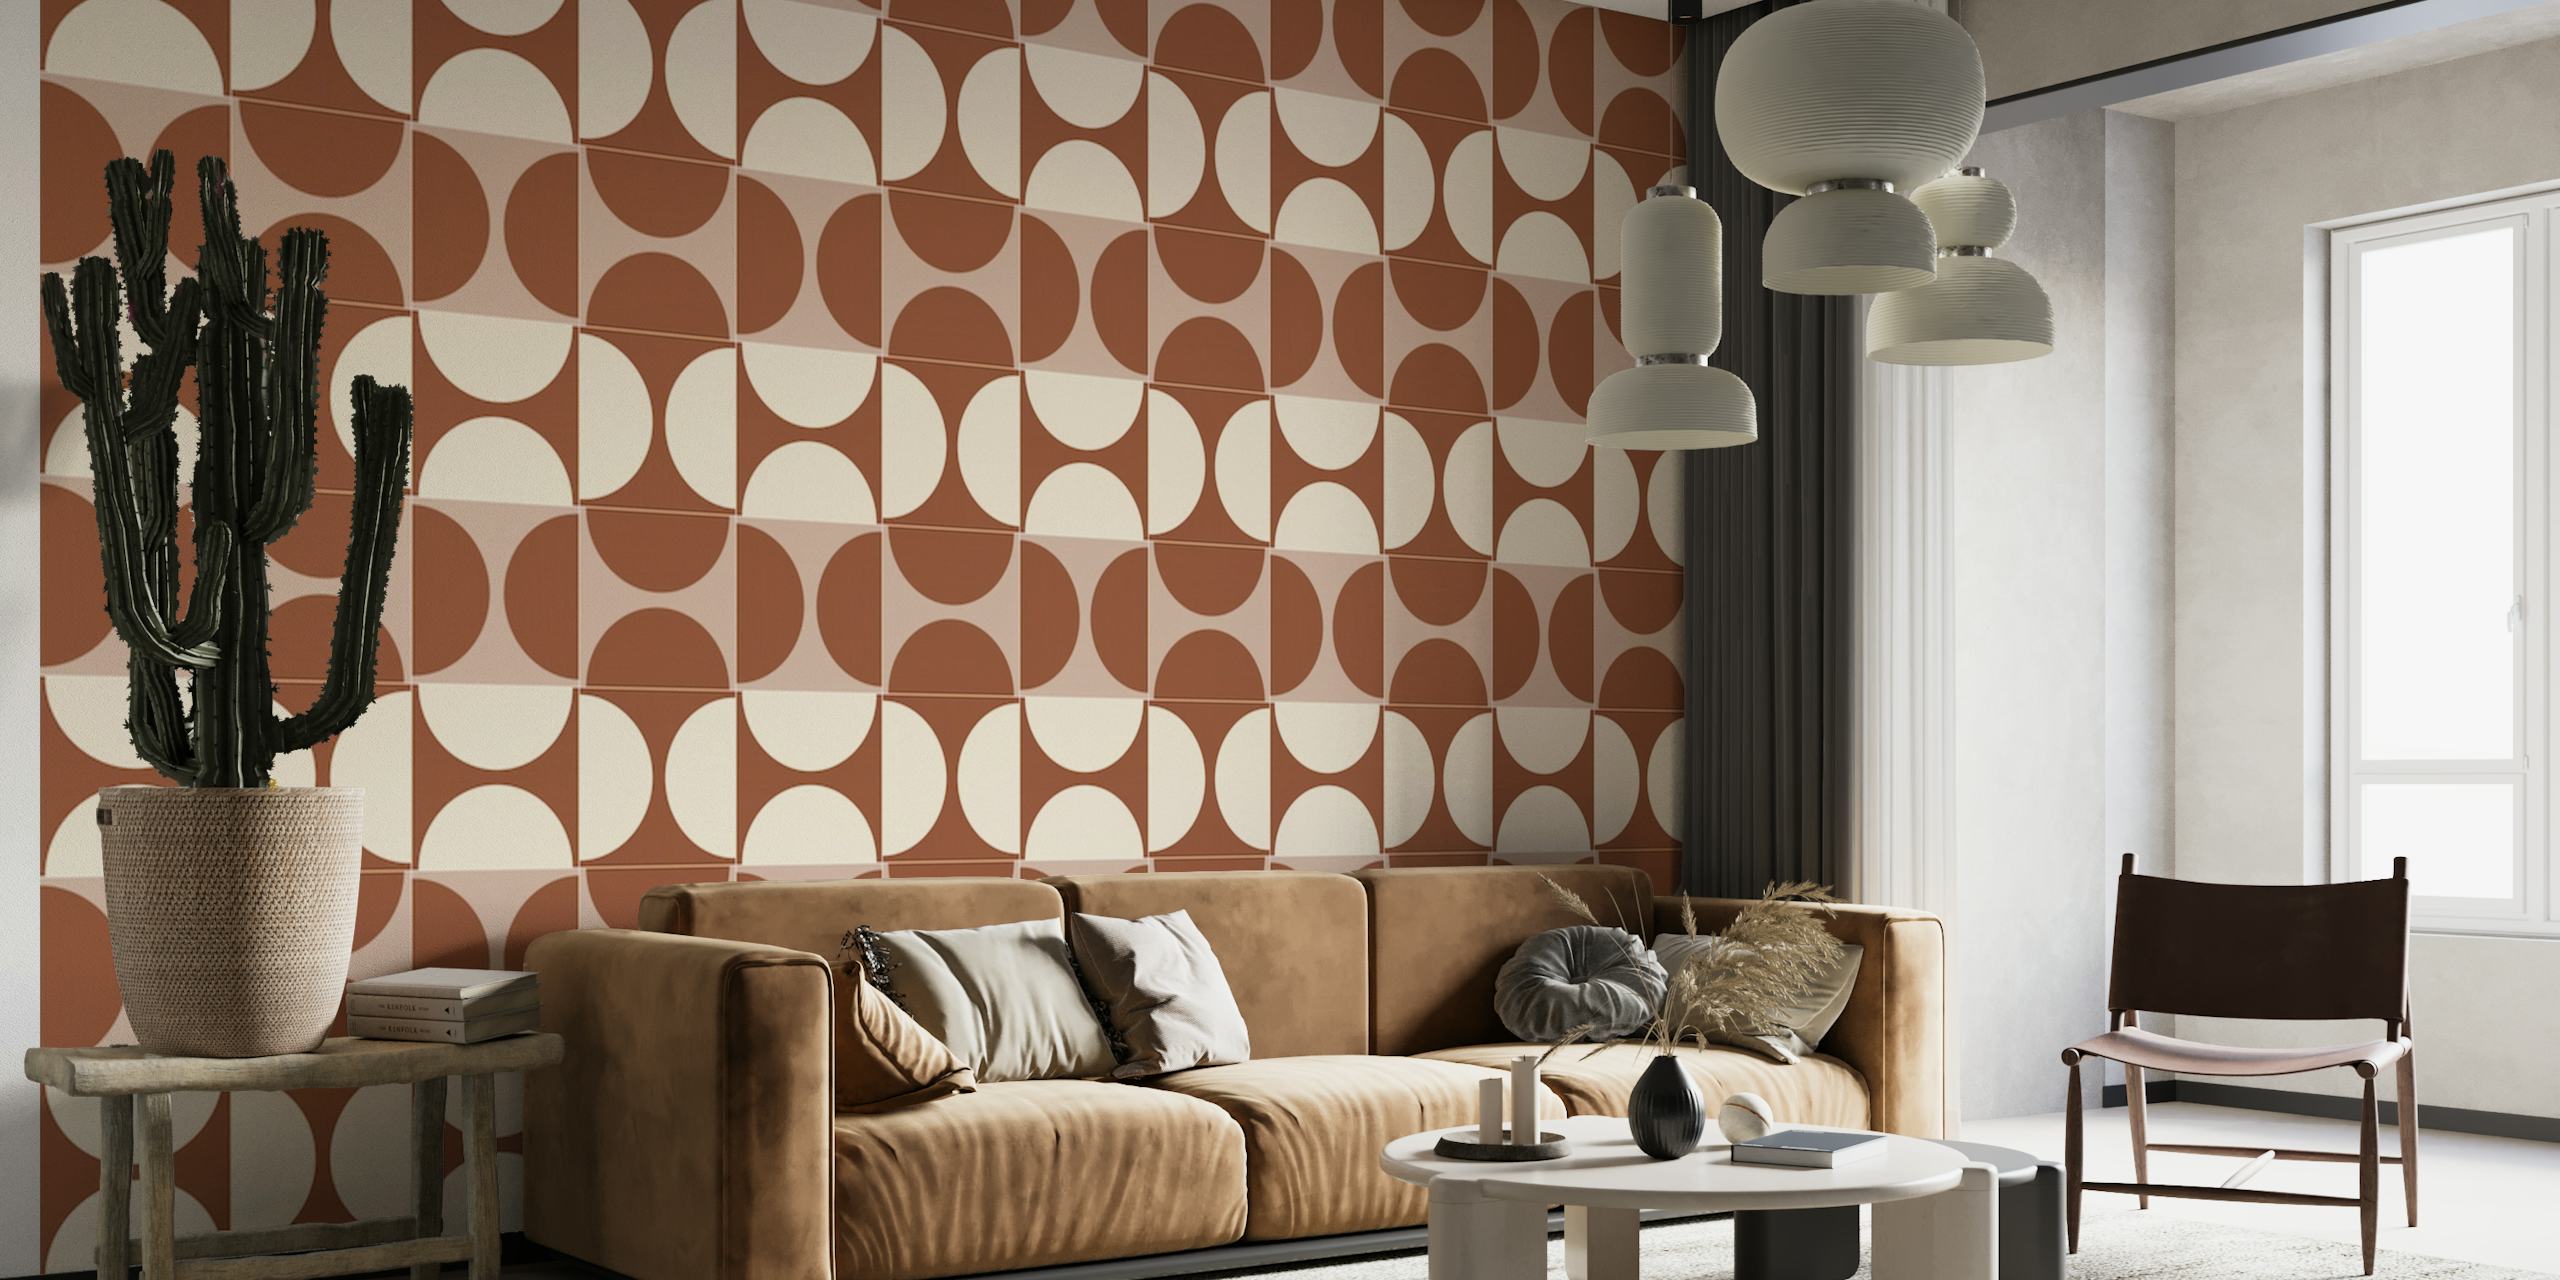 Cotto Tiles Cinnamon and Cream Lines pattern for wall mural